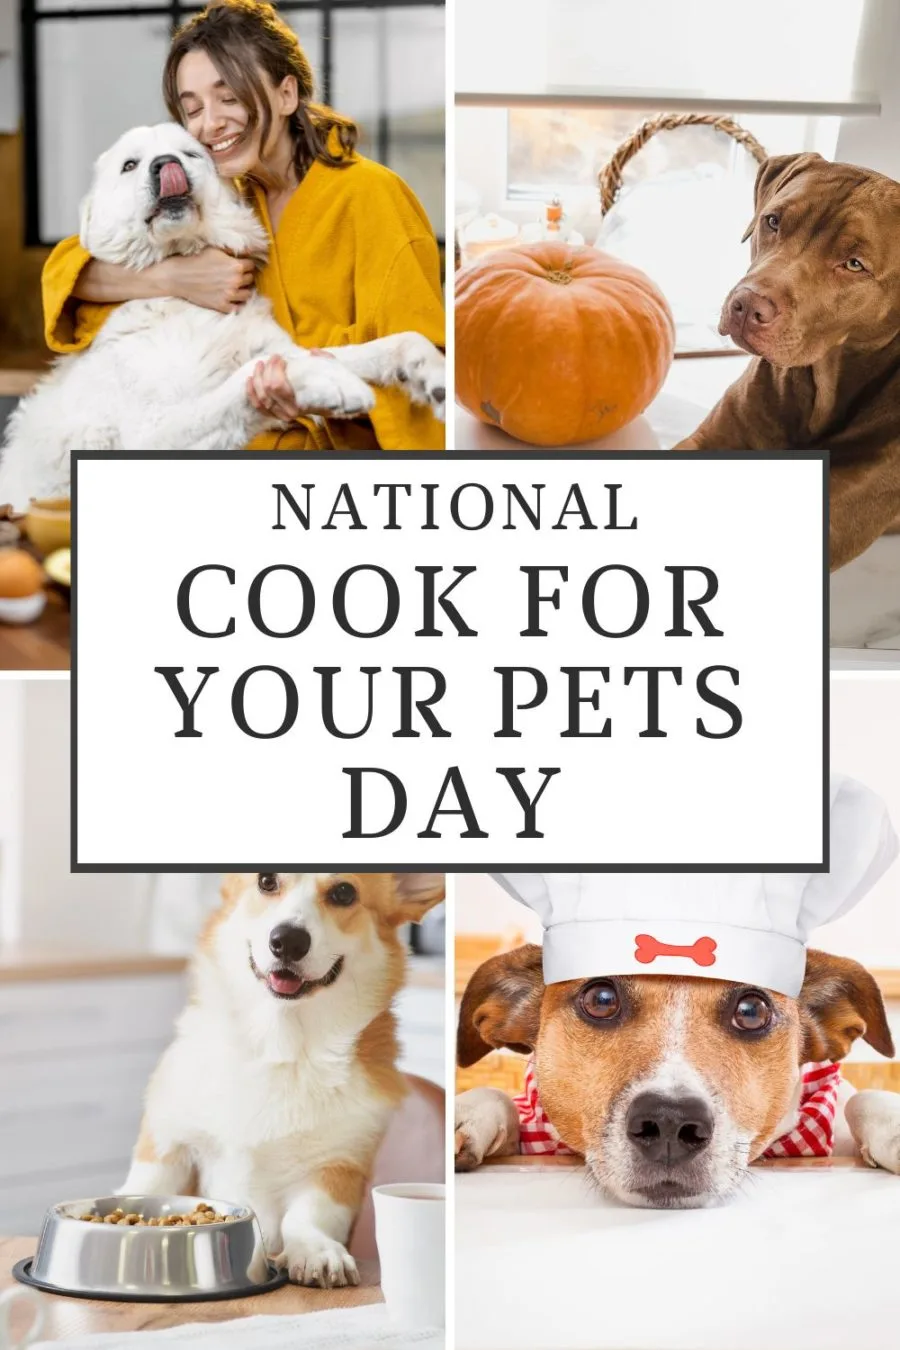 National Cook for Your Pets Day